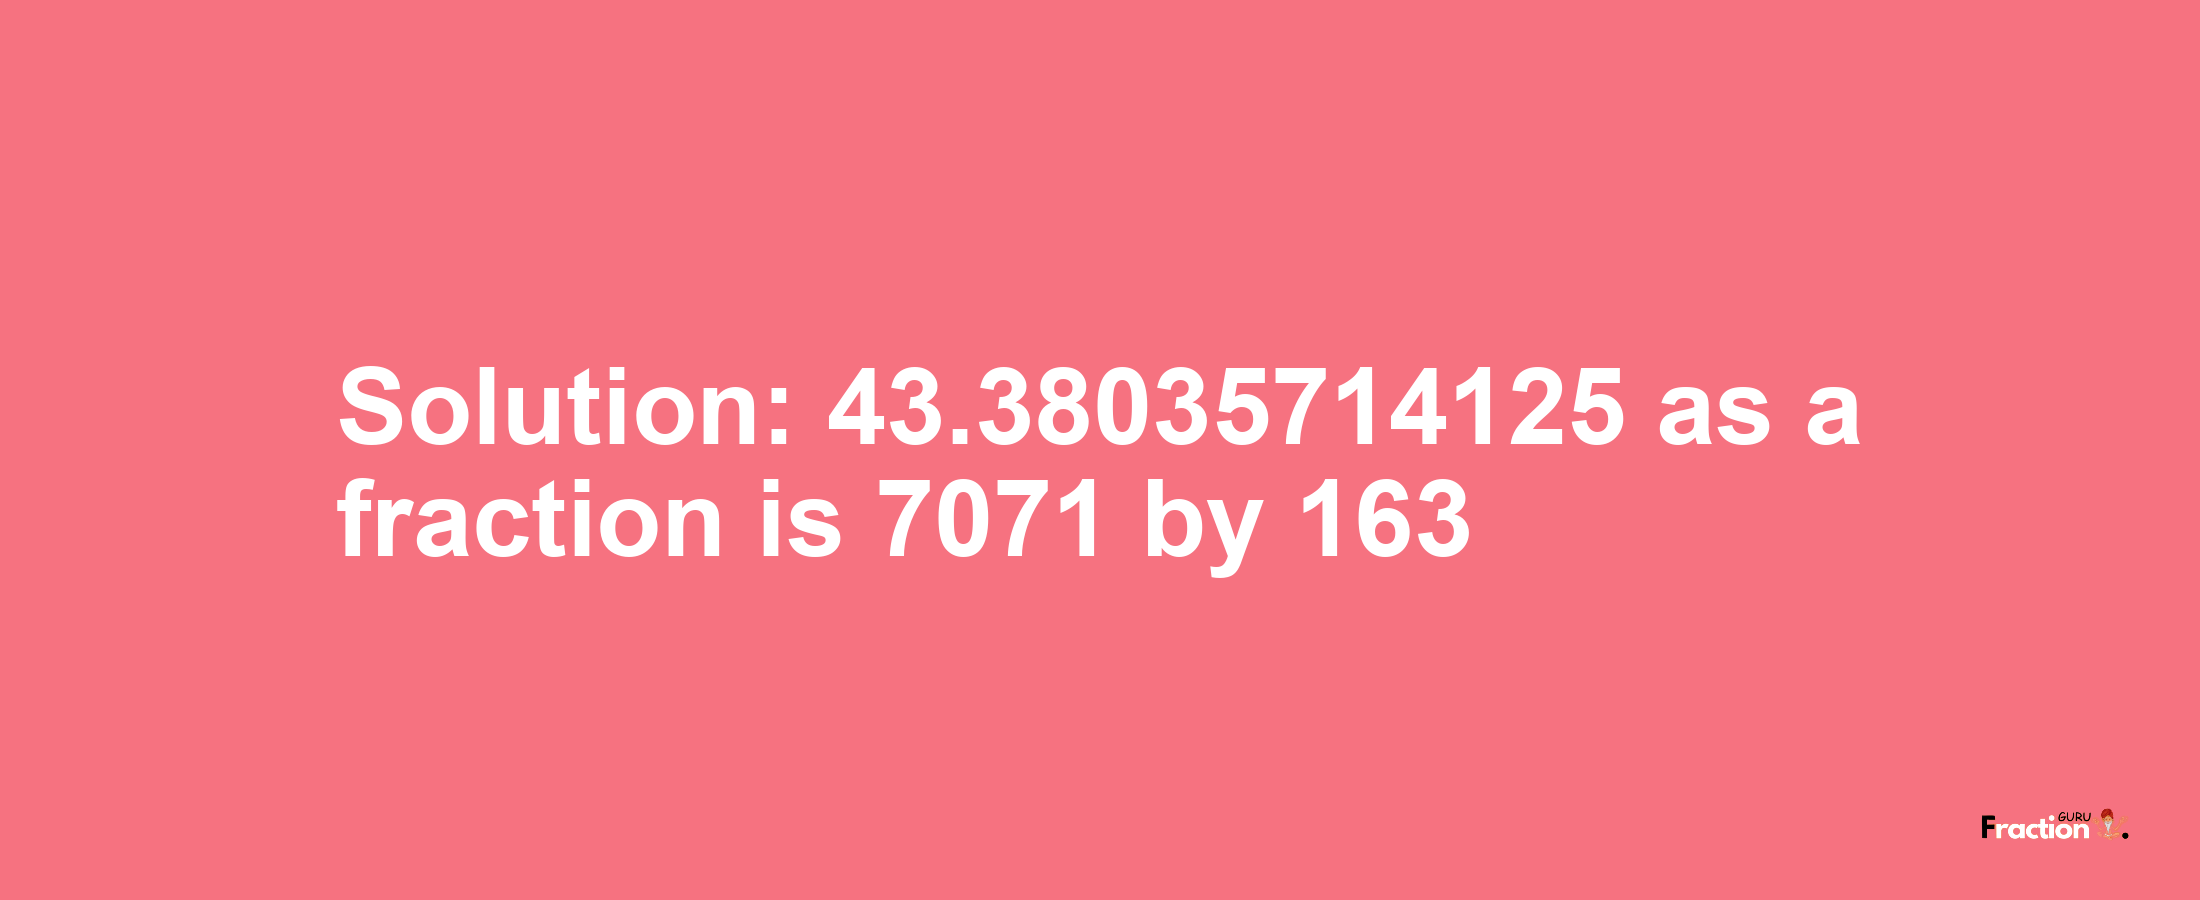 Solution:43.38035714125 as a fraction is 7071/163